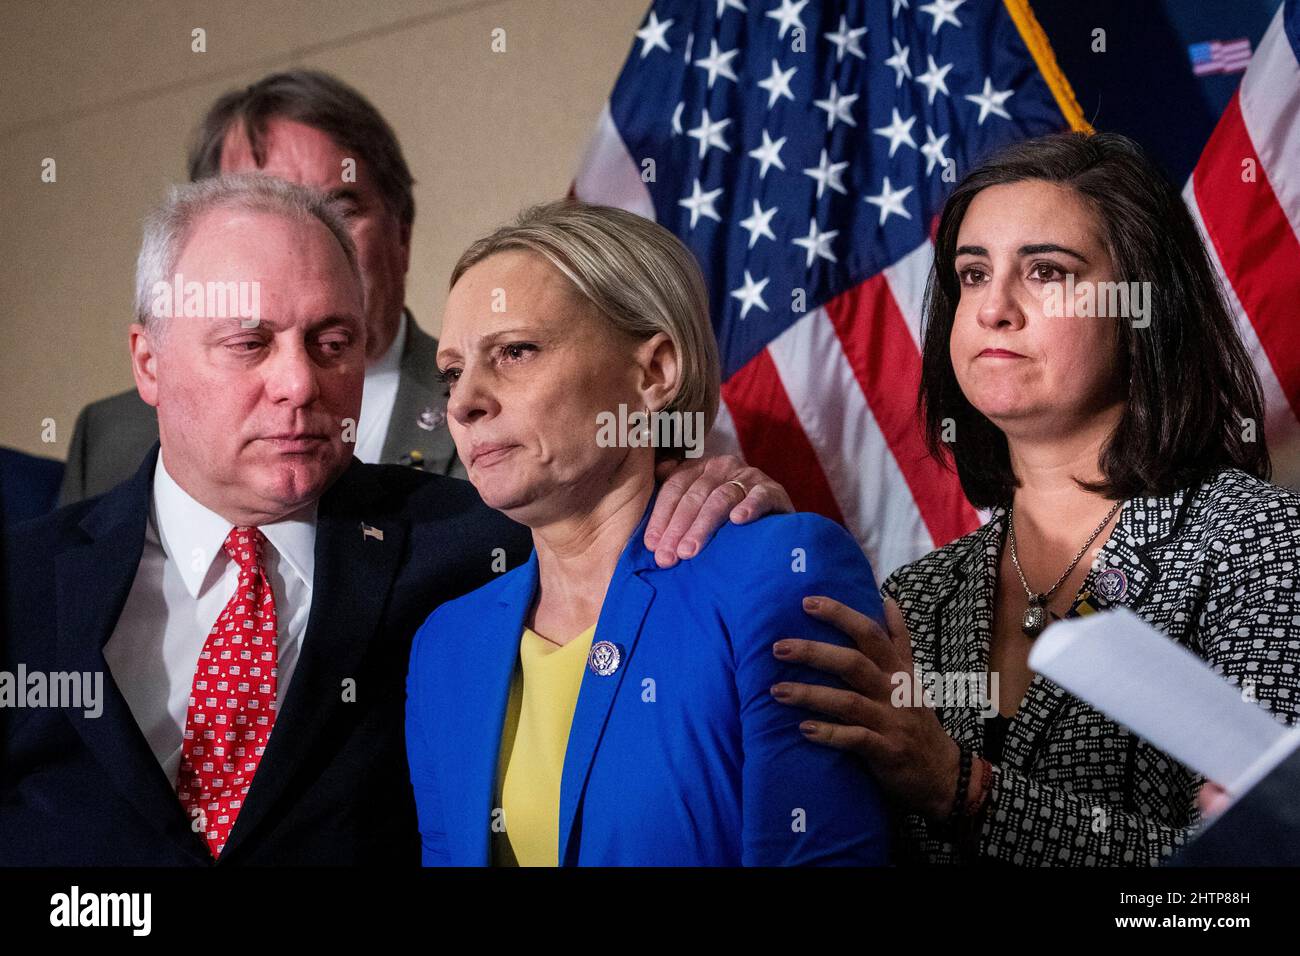 United States House Minority Whip Steve Scalise (Republican of Louisiana), left, and United States Representative Nicole Malliotakis (Republican of New York), right, comfort United States Representative Victoria Spartz (Republican of Indiana), center, following her emotional remarks on the current situation in her home country of Ukraine, as GOP House leadership offers remarks on United States President Joe Biden’s upcoming State of the Union Address, in the Rayburn House Office Building in Washington, DC, USA, Tuesday, March 1, 2022. Rep. Spartz was born in Nosivka, Ukraine. Photo by Rod Lamk Stock Photo